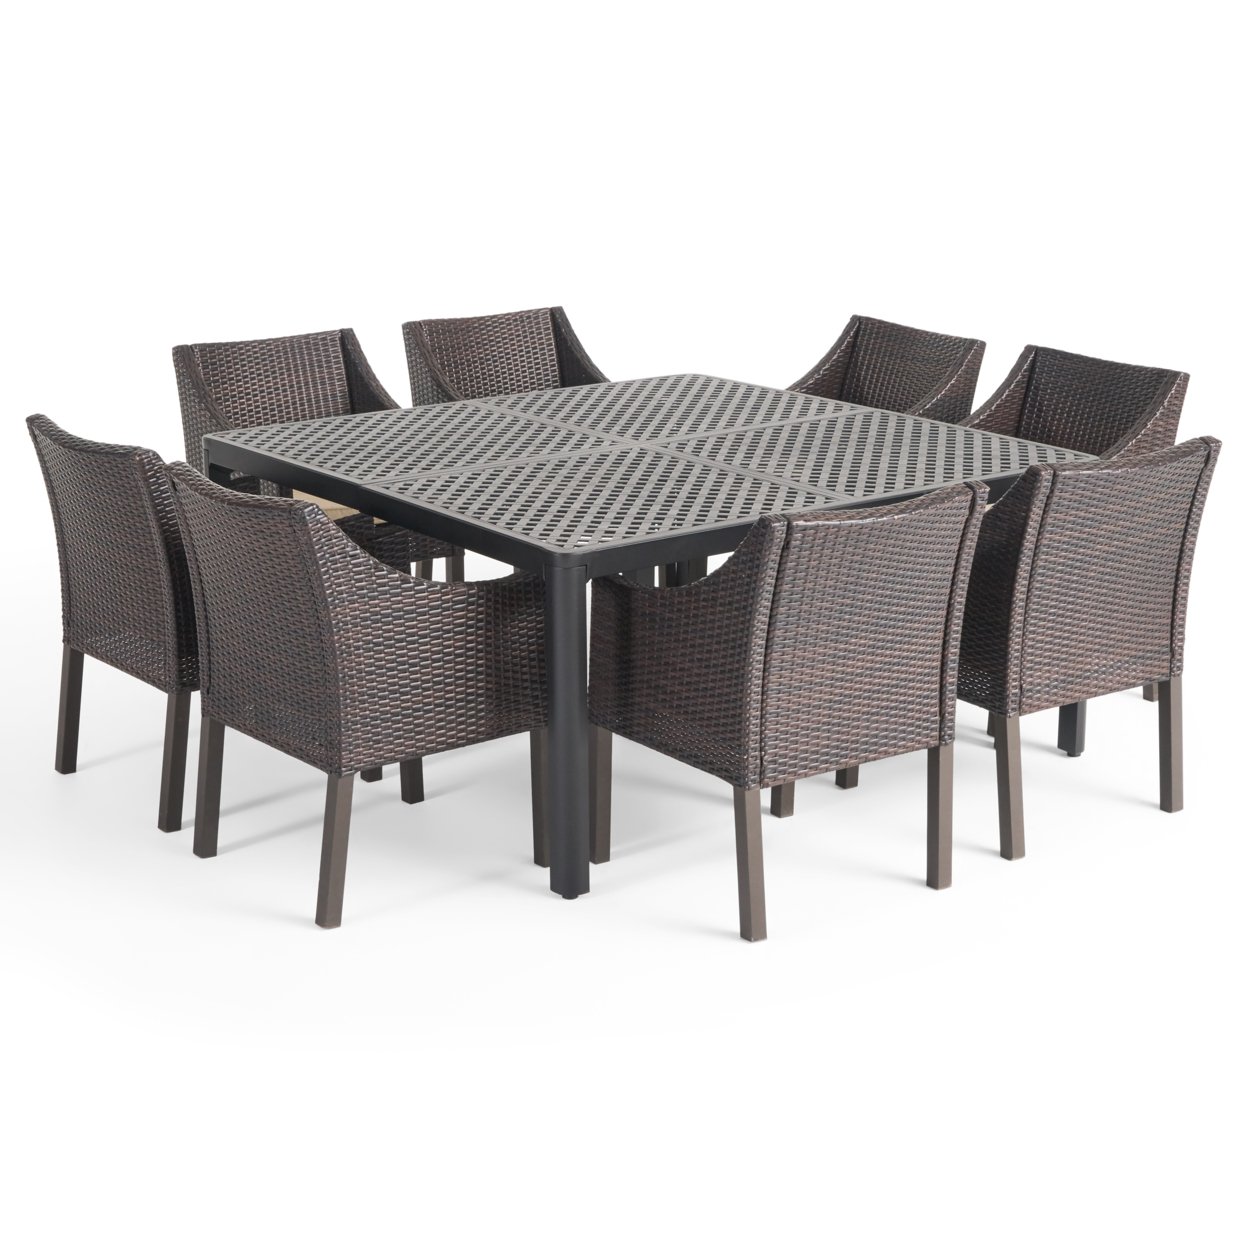 Megan Outdoor Aluminum And Wicker 8 Seater Dining Set - Gloss Black + Multibrown + Beige